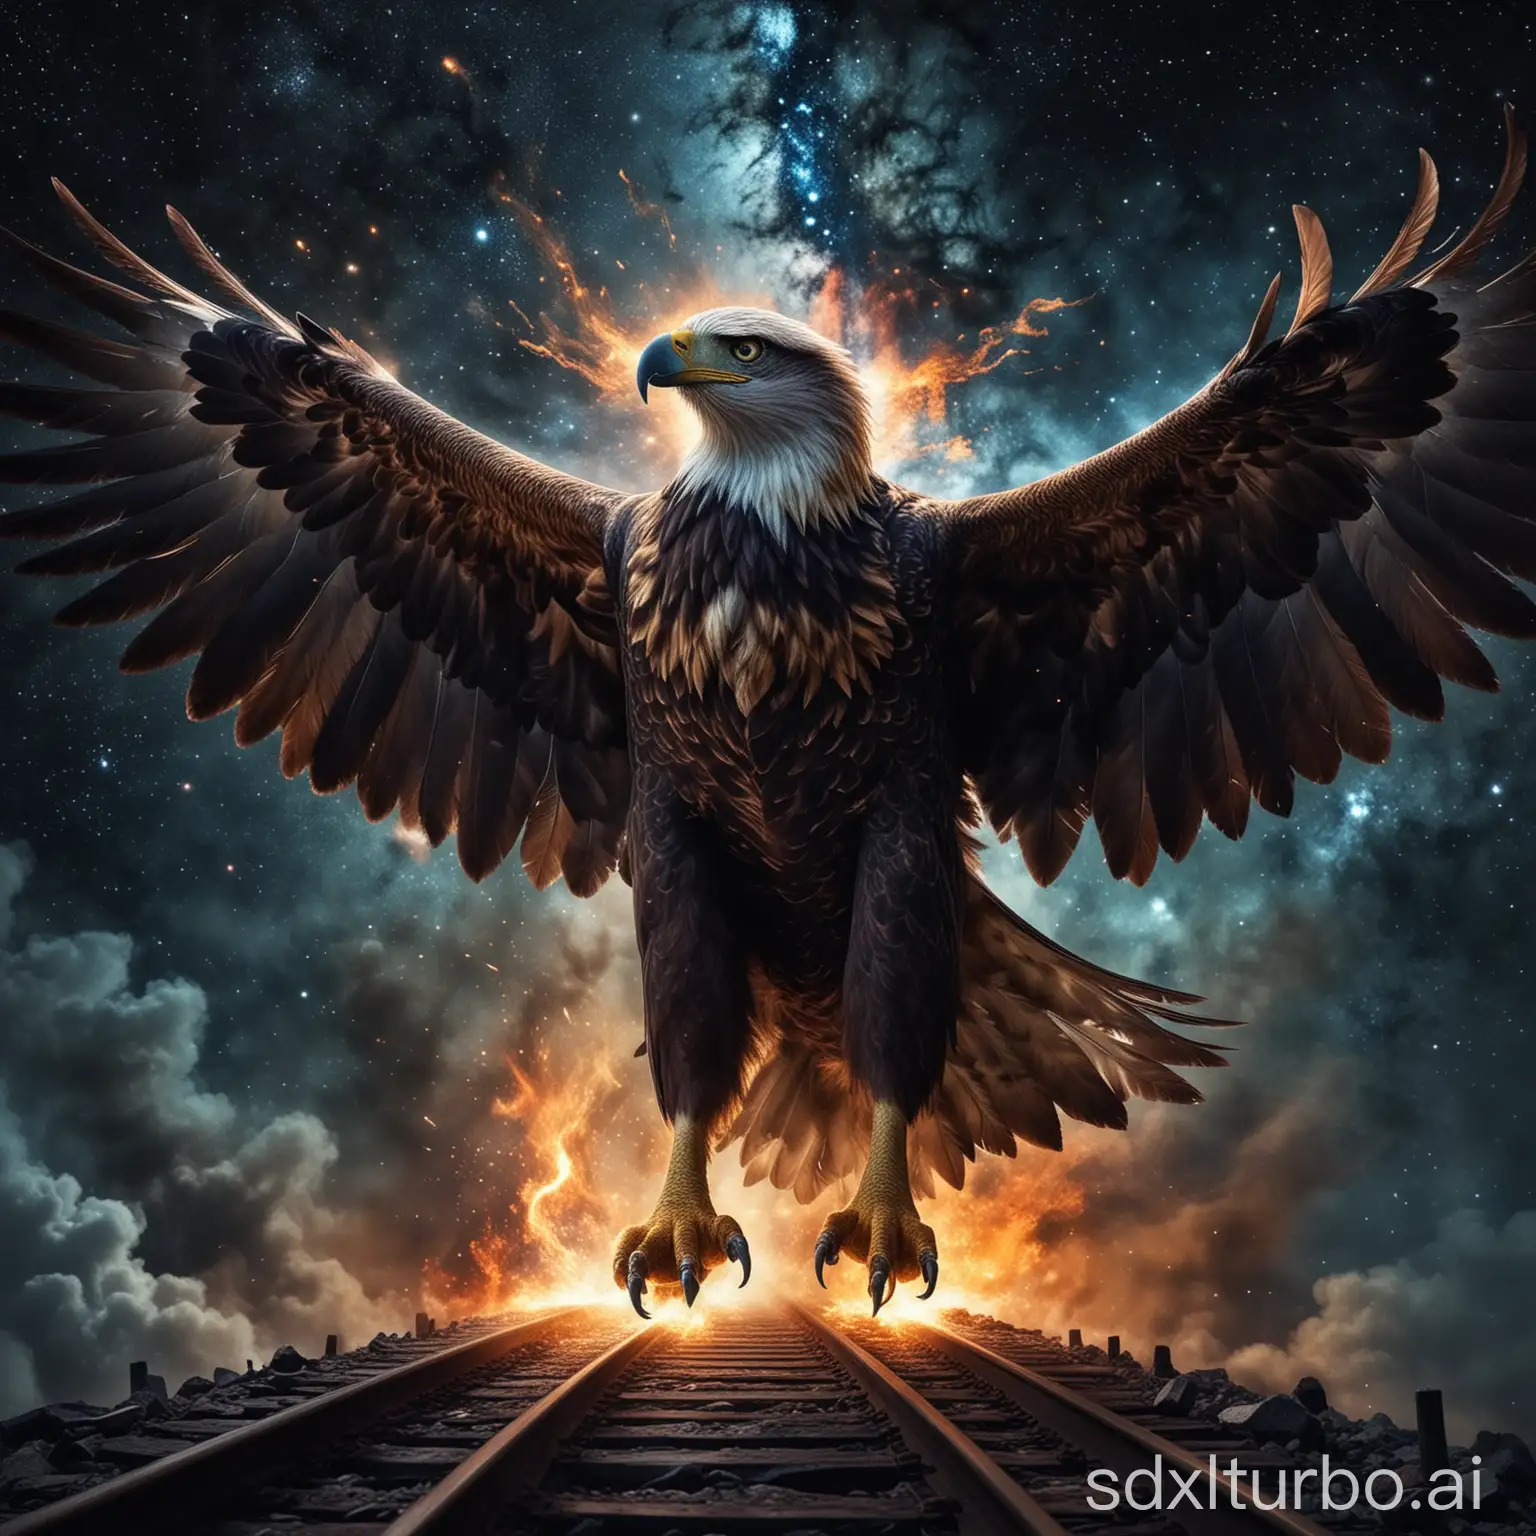 Solitary-Eagle-Reacting-to-Excessive-Darkness-in-a-Distorted-Galaxy